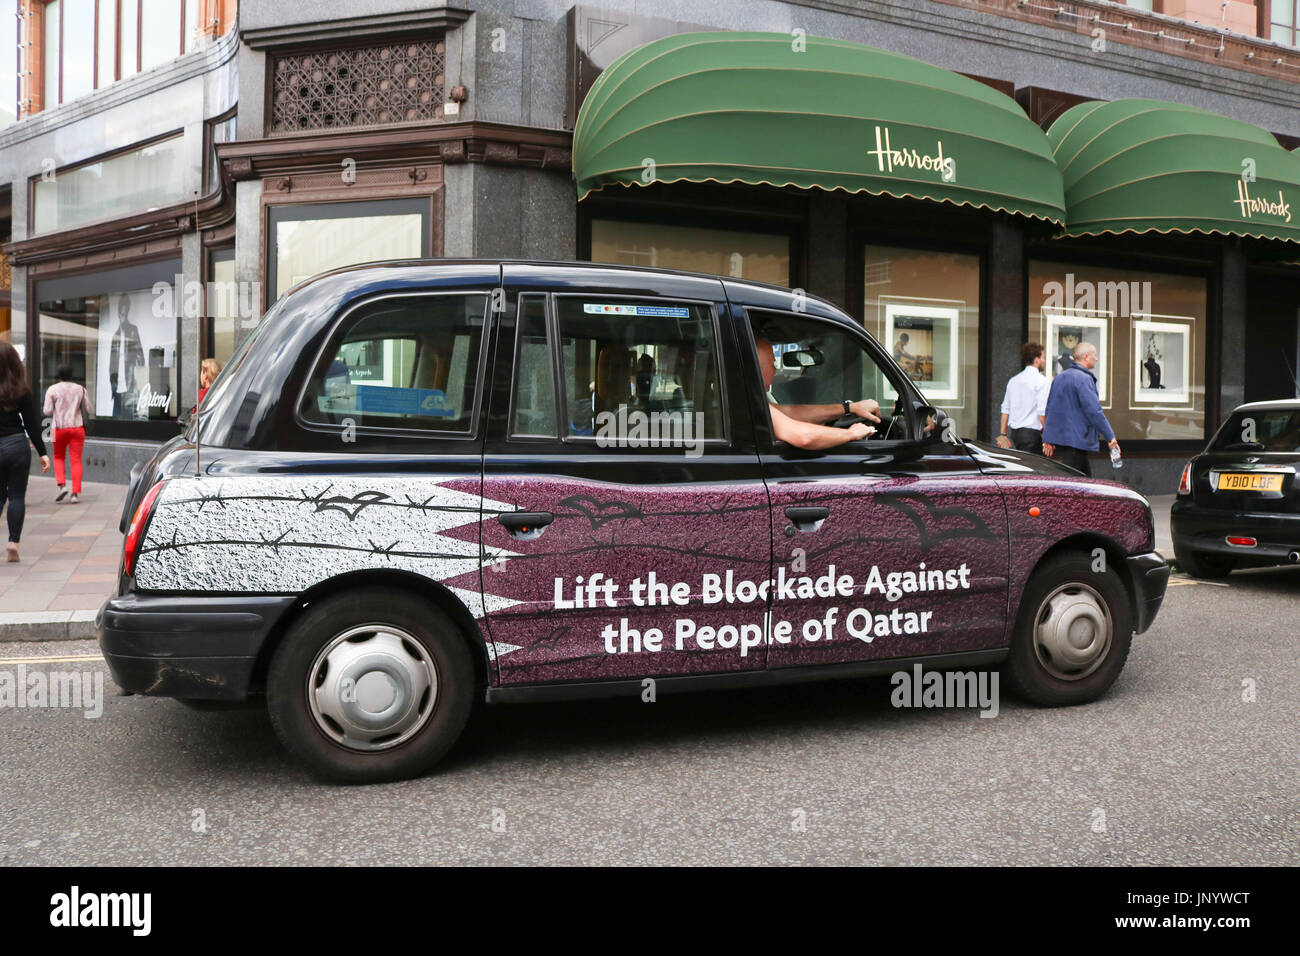 London, UK. 31st July, 2017. A London Taxi with livery calling for the lifting of the economic blockade against the people of Qatar after sanctions were imposed by the Gulf states of Saudi Arabia, Bahrain, Egypt and the United Arab Emirates, which have imposed a land sea air and economic blockade on Qatar since 5 June, accusing the oil rich emirate of supporting terrorism Credit: amer ghazzal/Alamy Live News Stock Photo